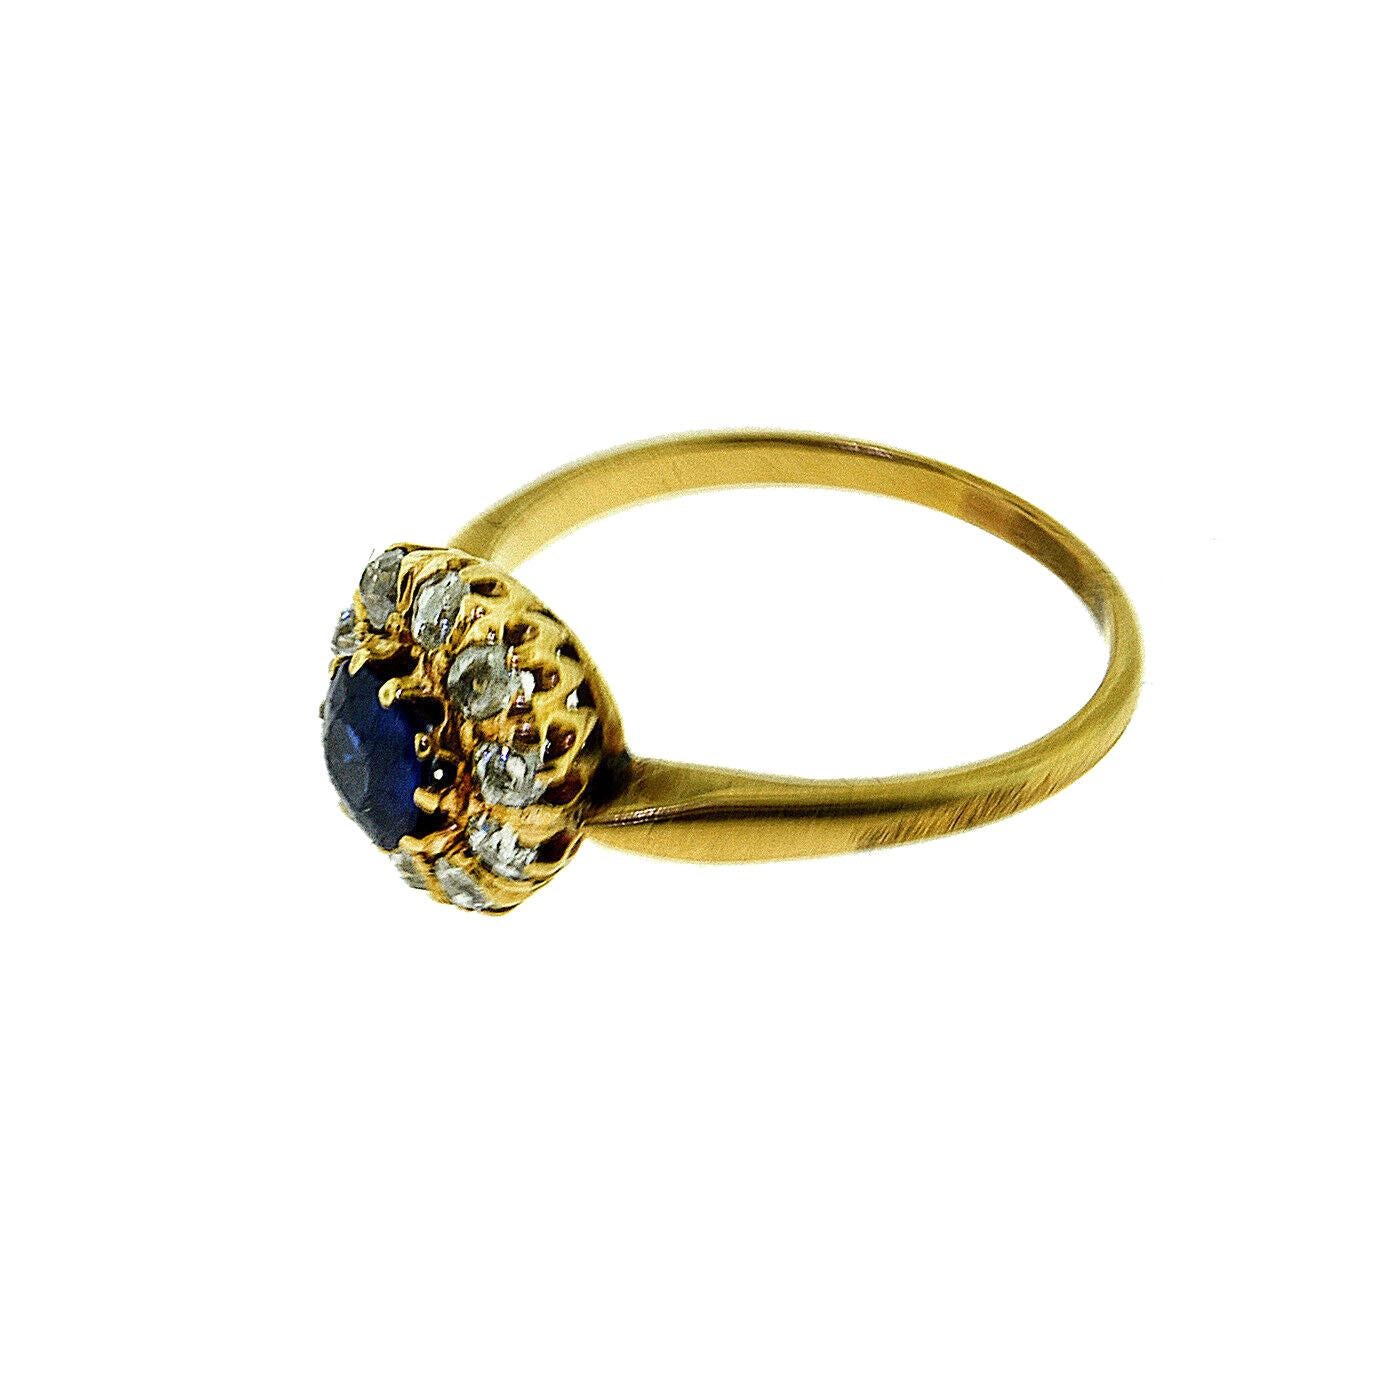 Brilliance Jewels, Miami
Questions? Call Us Anytime!
786,482,8100

Ring Size: ​​​​​​​6.5 , sizable on request

Style: Art Deco Ring

Era: 1940s Art Deco

Metal: Yellow Gold

Metal Purity: 18k

Stones:  1 Round Natural No Heat Sapphire, Old European